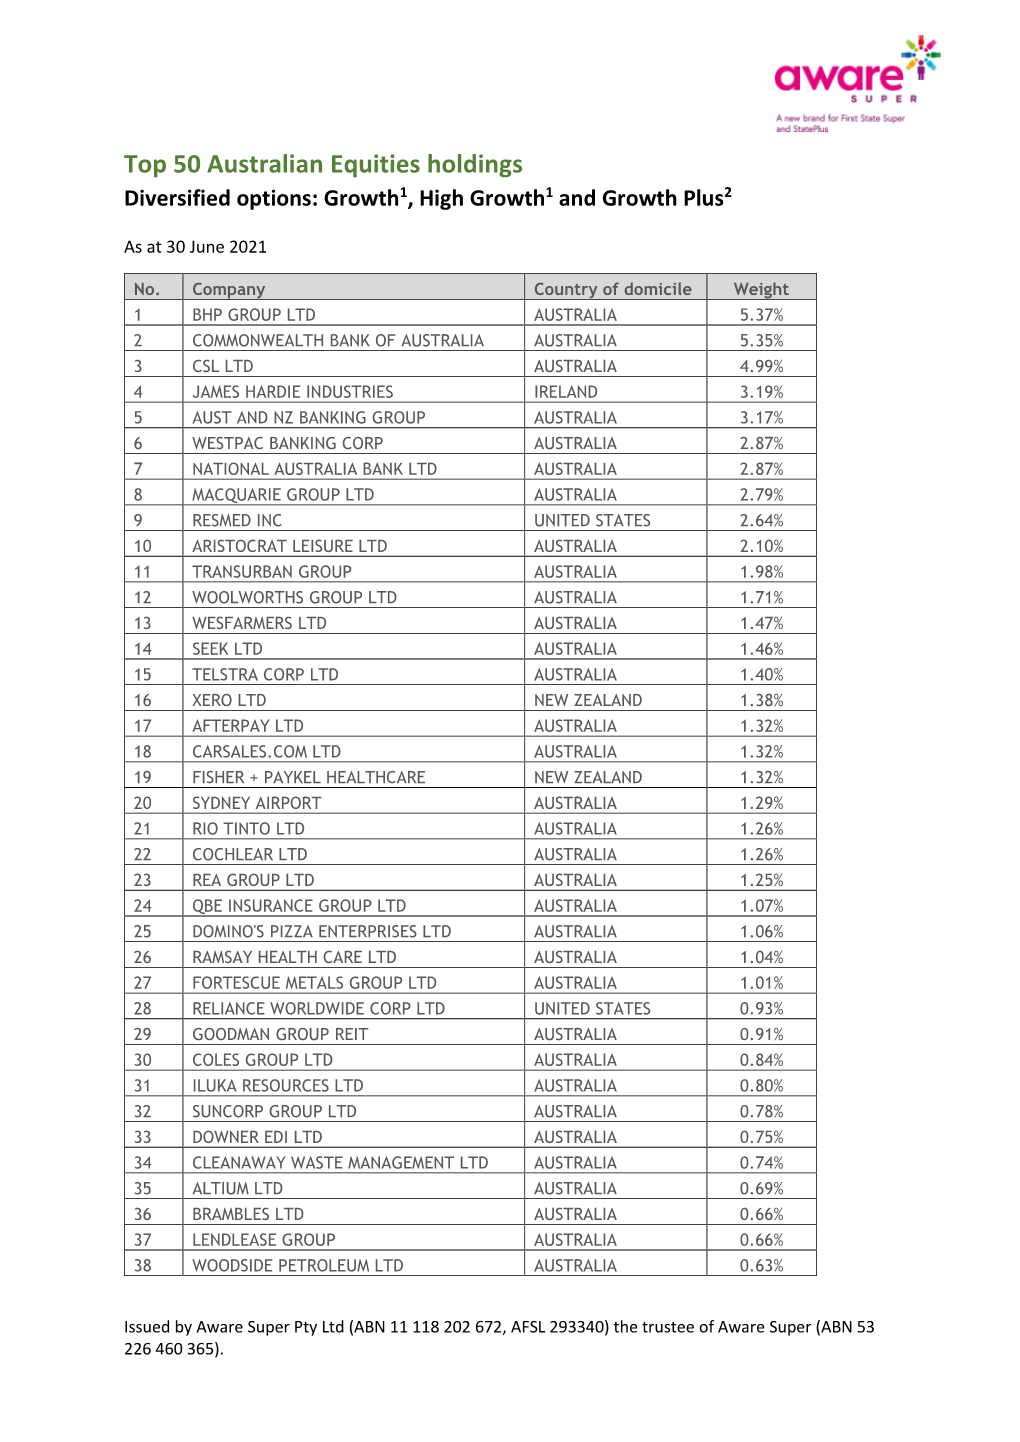 Top 50 Australian Equities Holdings Diversified Options: Growth1, High Growth1 and Growth Plus2